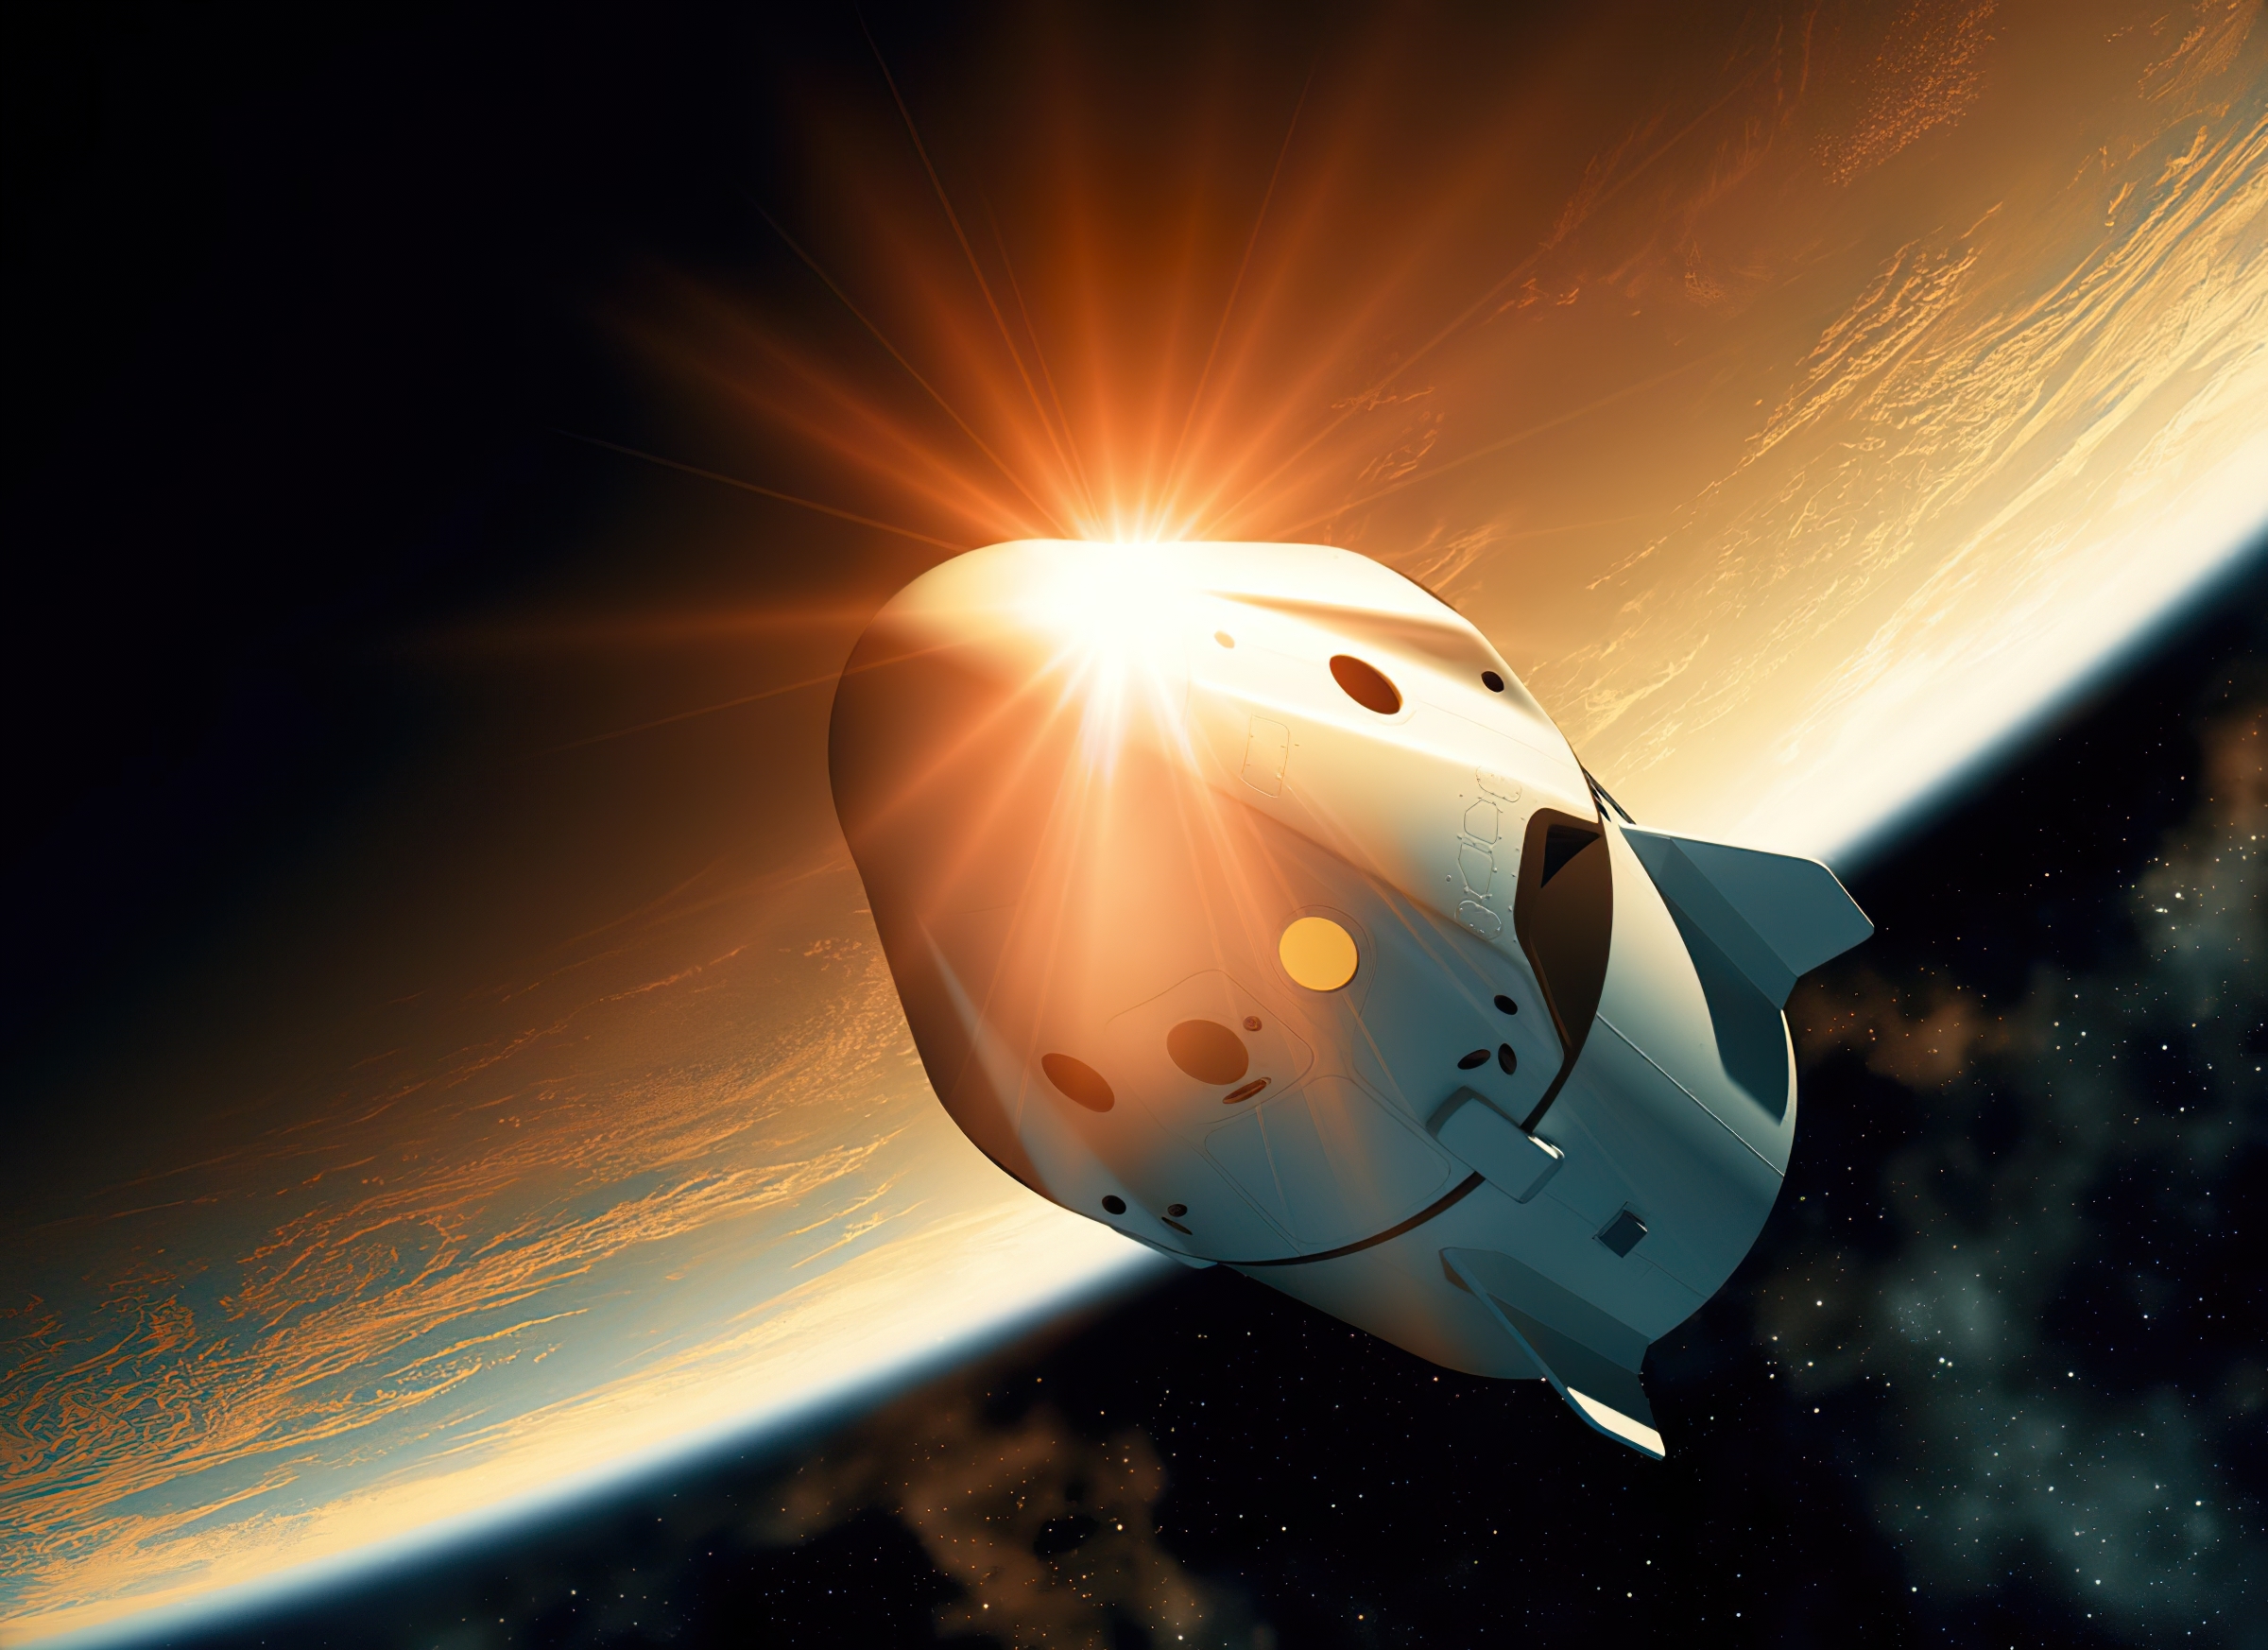 SpaceX fans here are 30 hires wallpapers for your phone or PC  Android  Authority